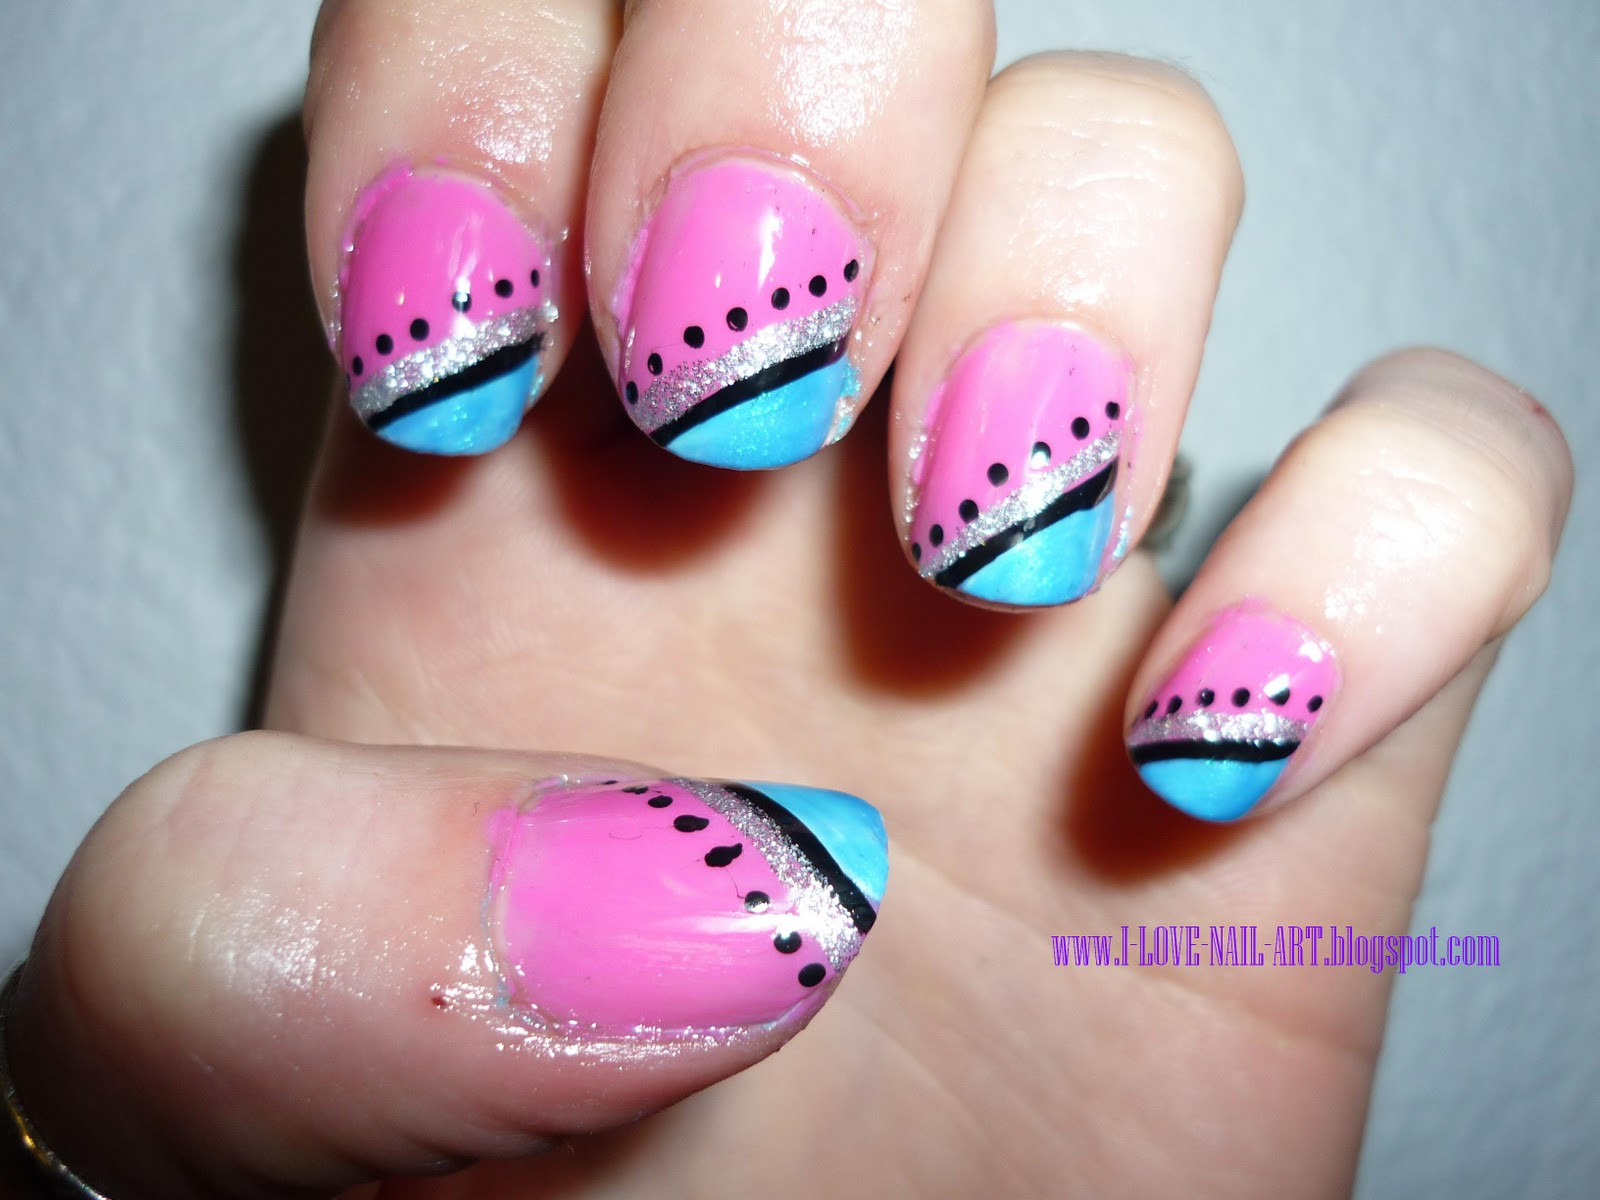 Nail Designs For Short Nails Pictures
 3 Short Nail Designs i ♥ ηαiℓ αяt